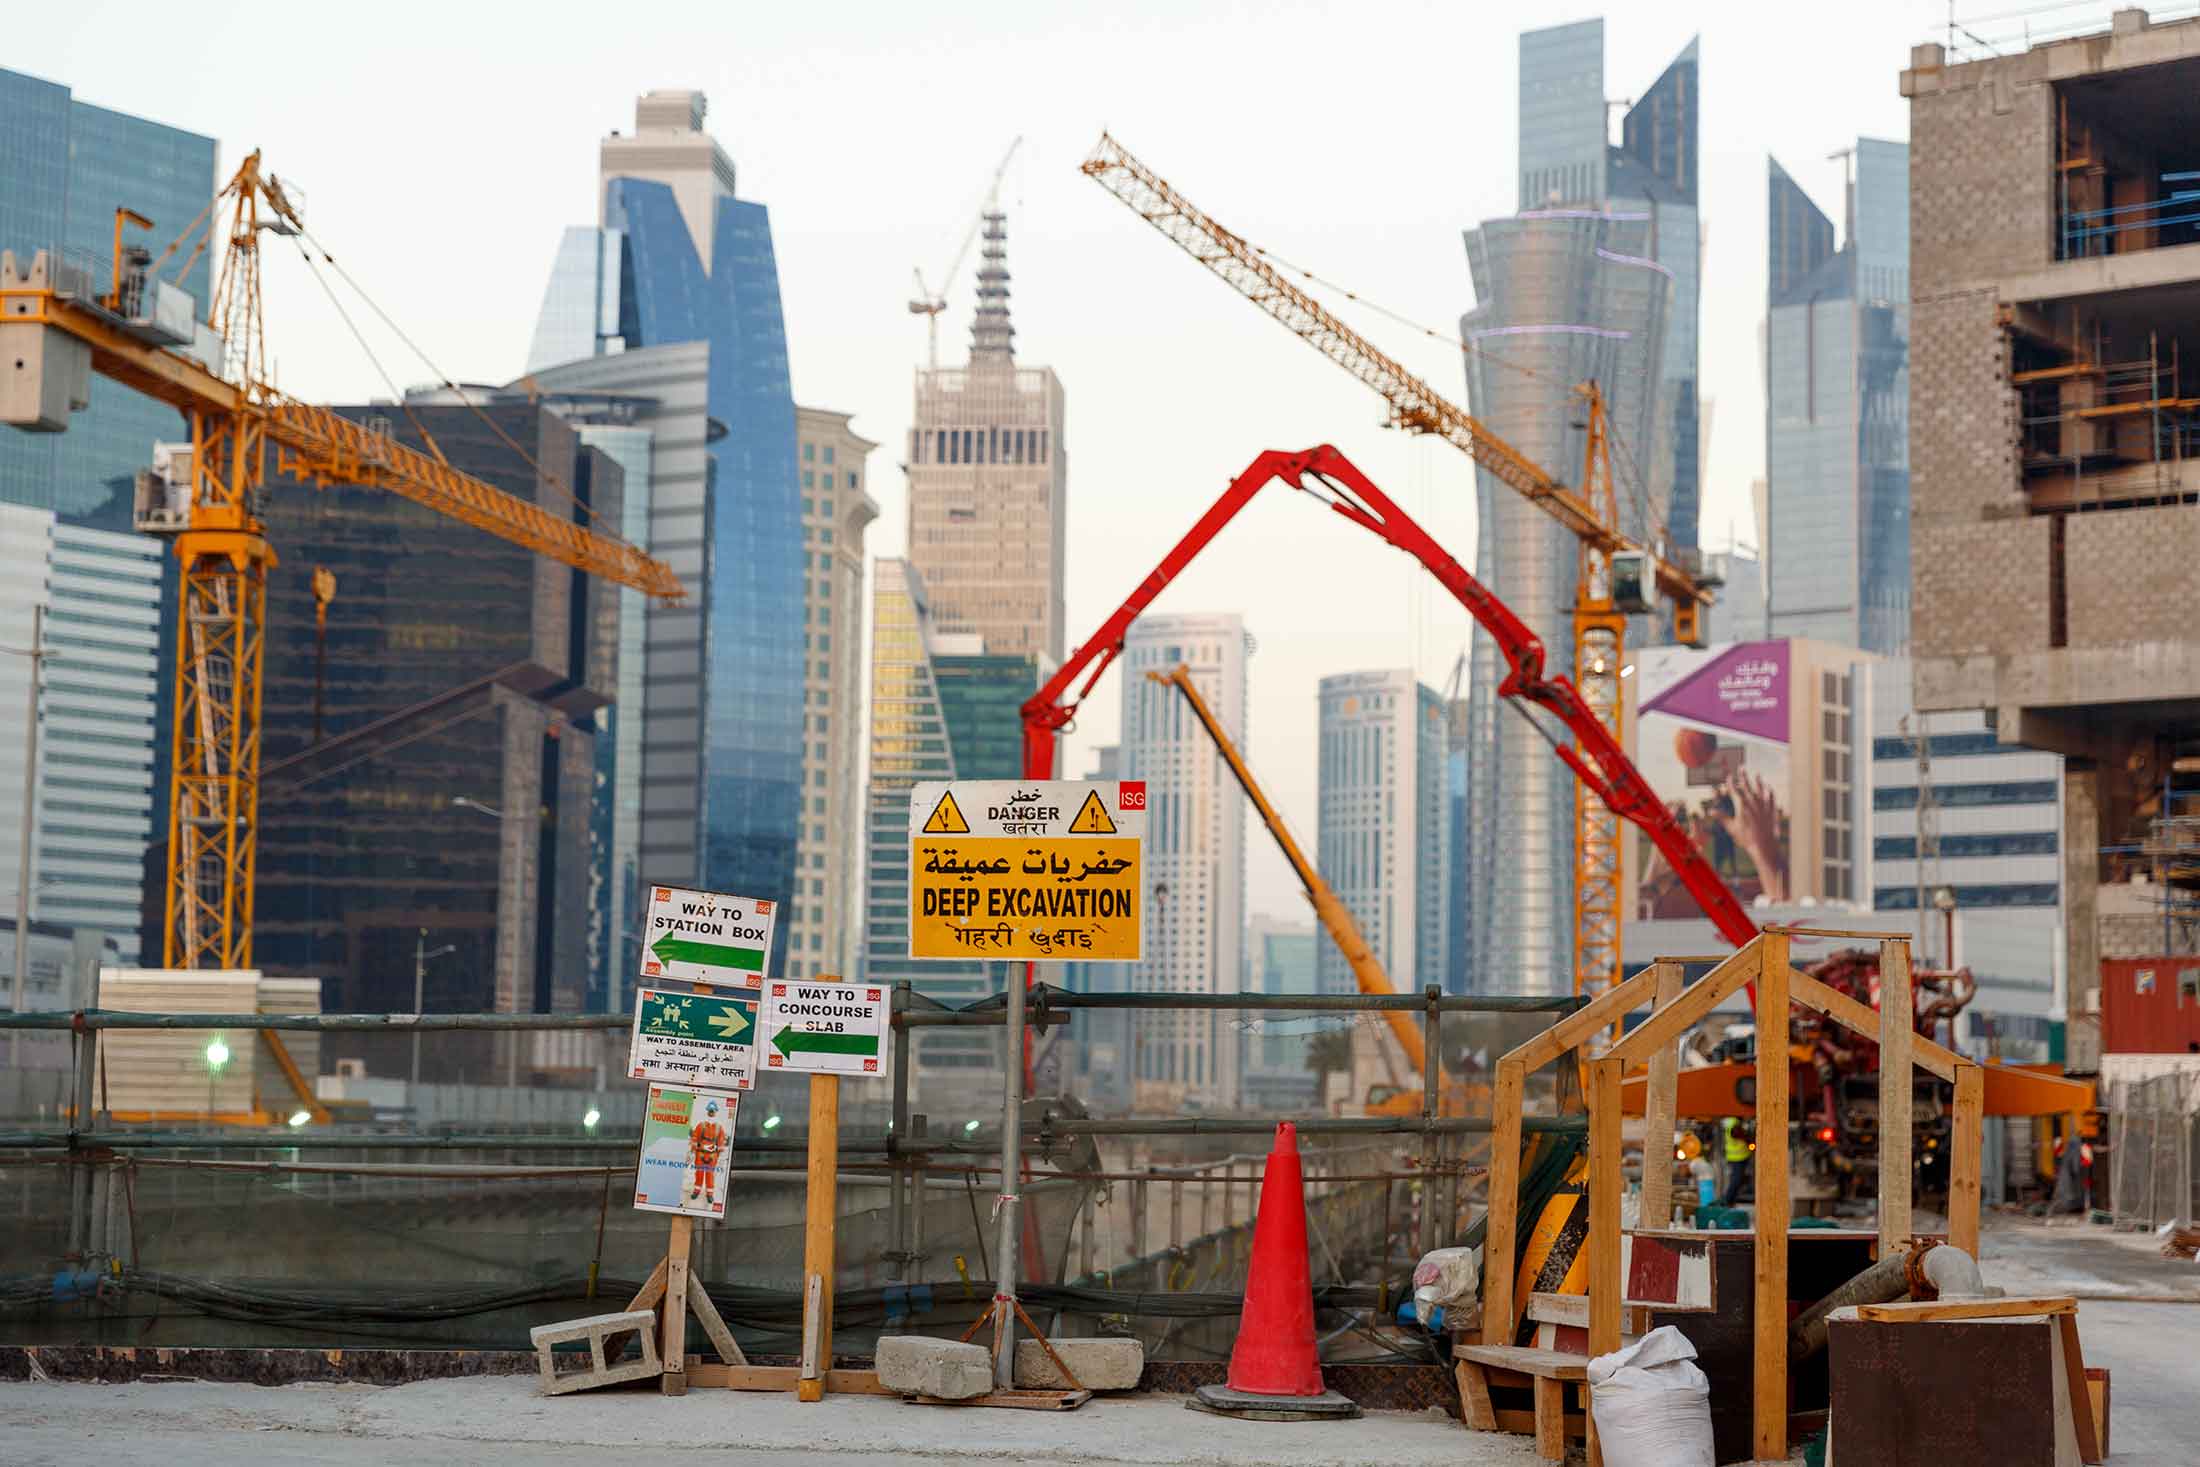 Construction of the Doha Metro system is expected to be finished in 2019, ahead of the 2022 FIFA World Cup in Qatar.